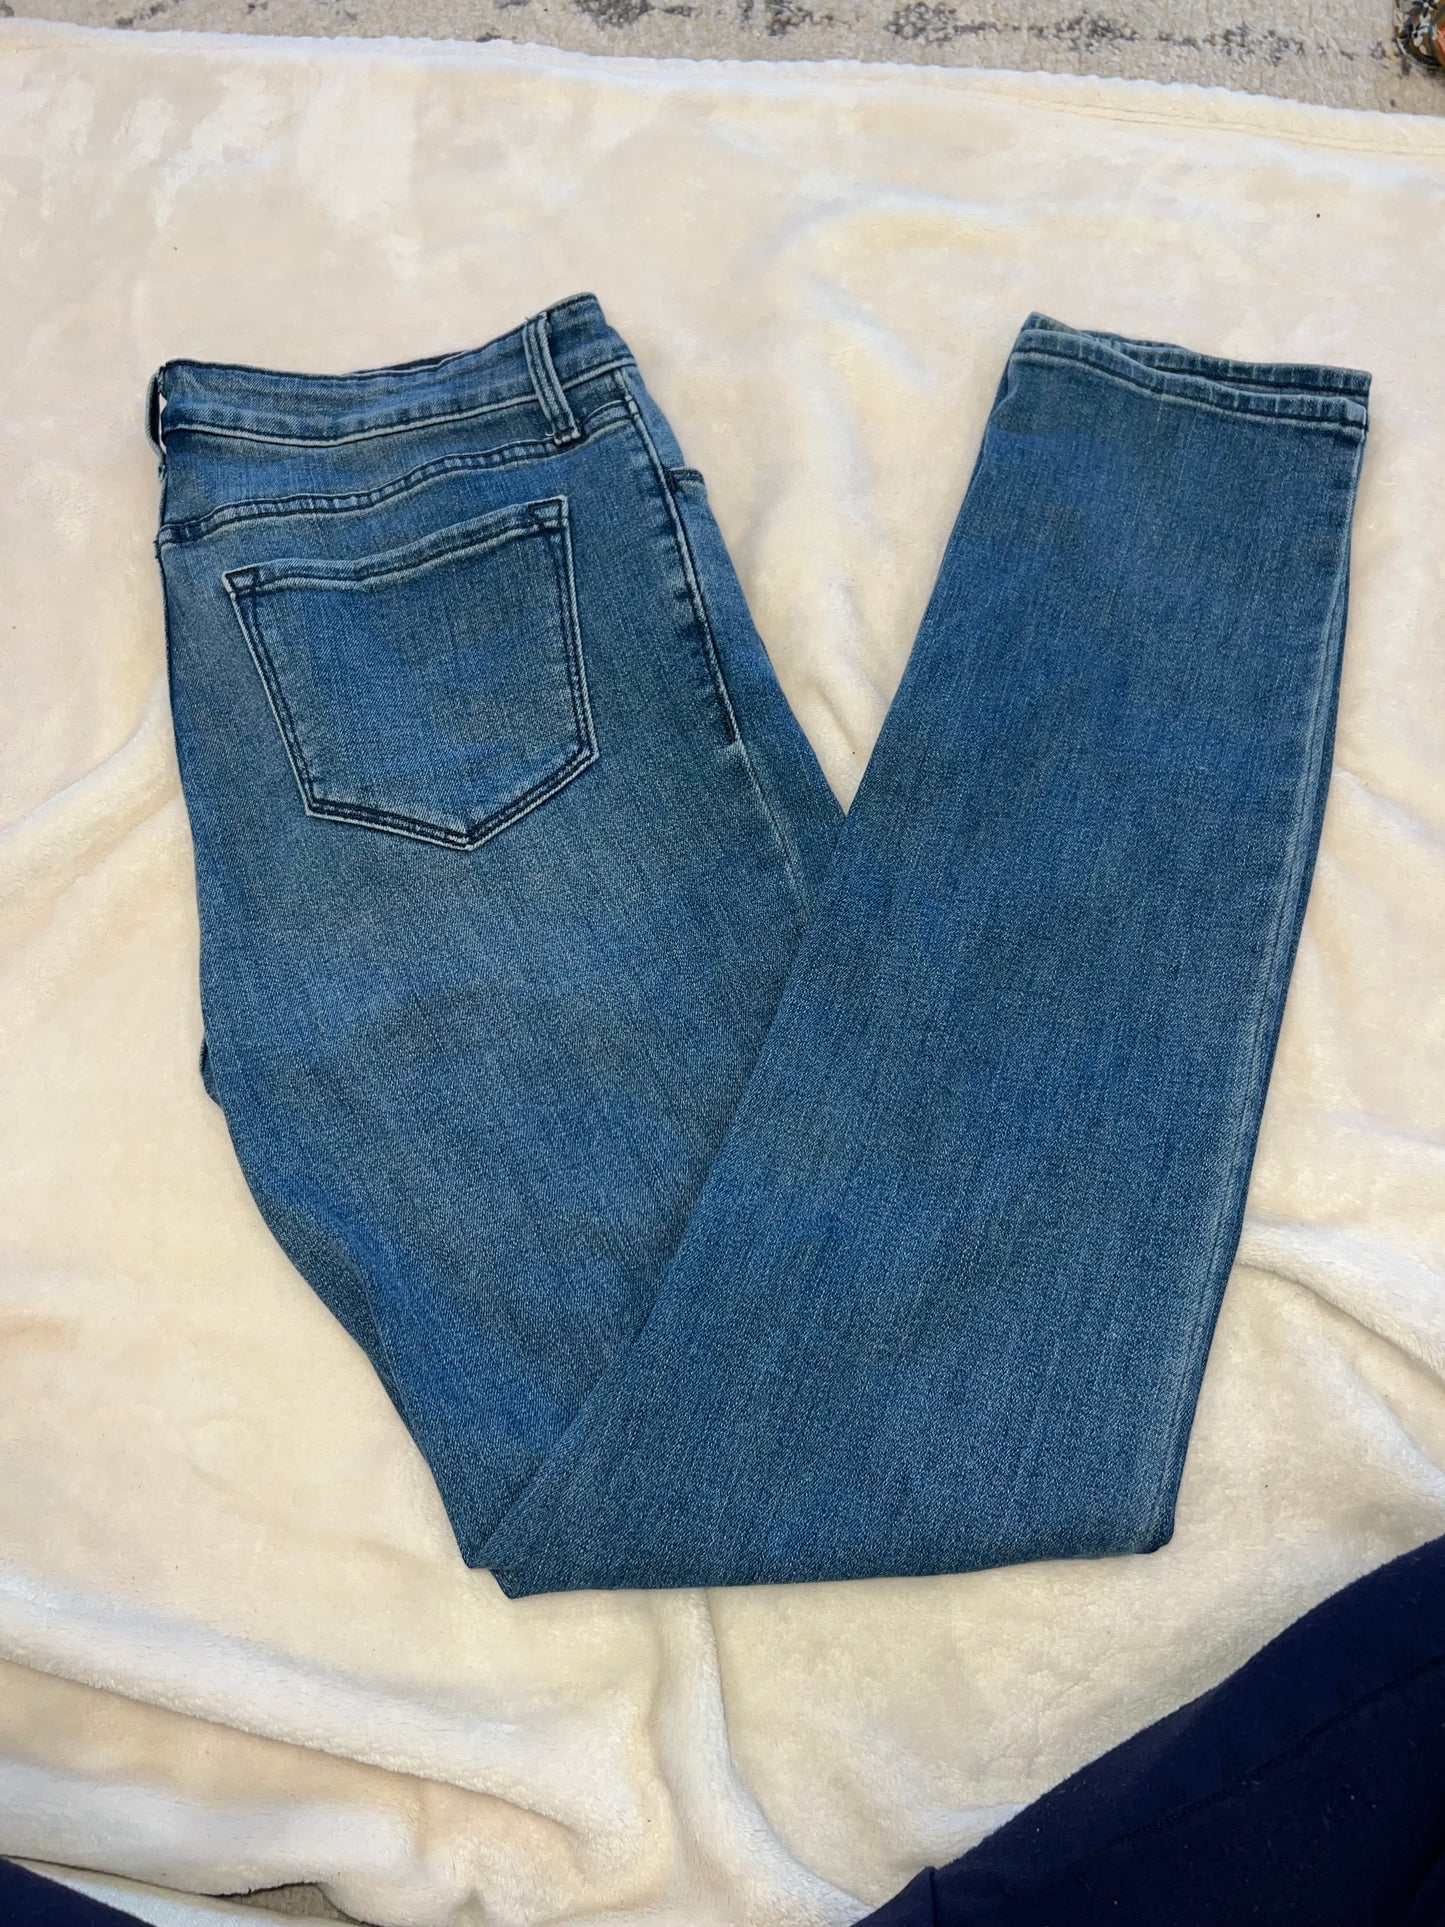 Womens Size 10 oldnavy high rise straight